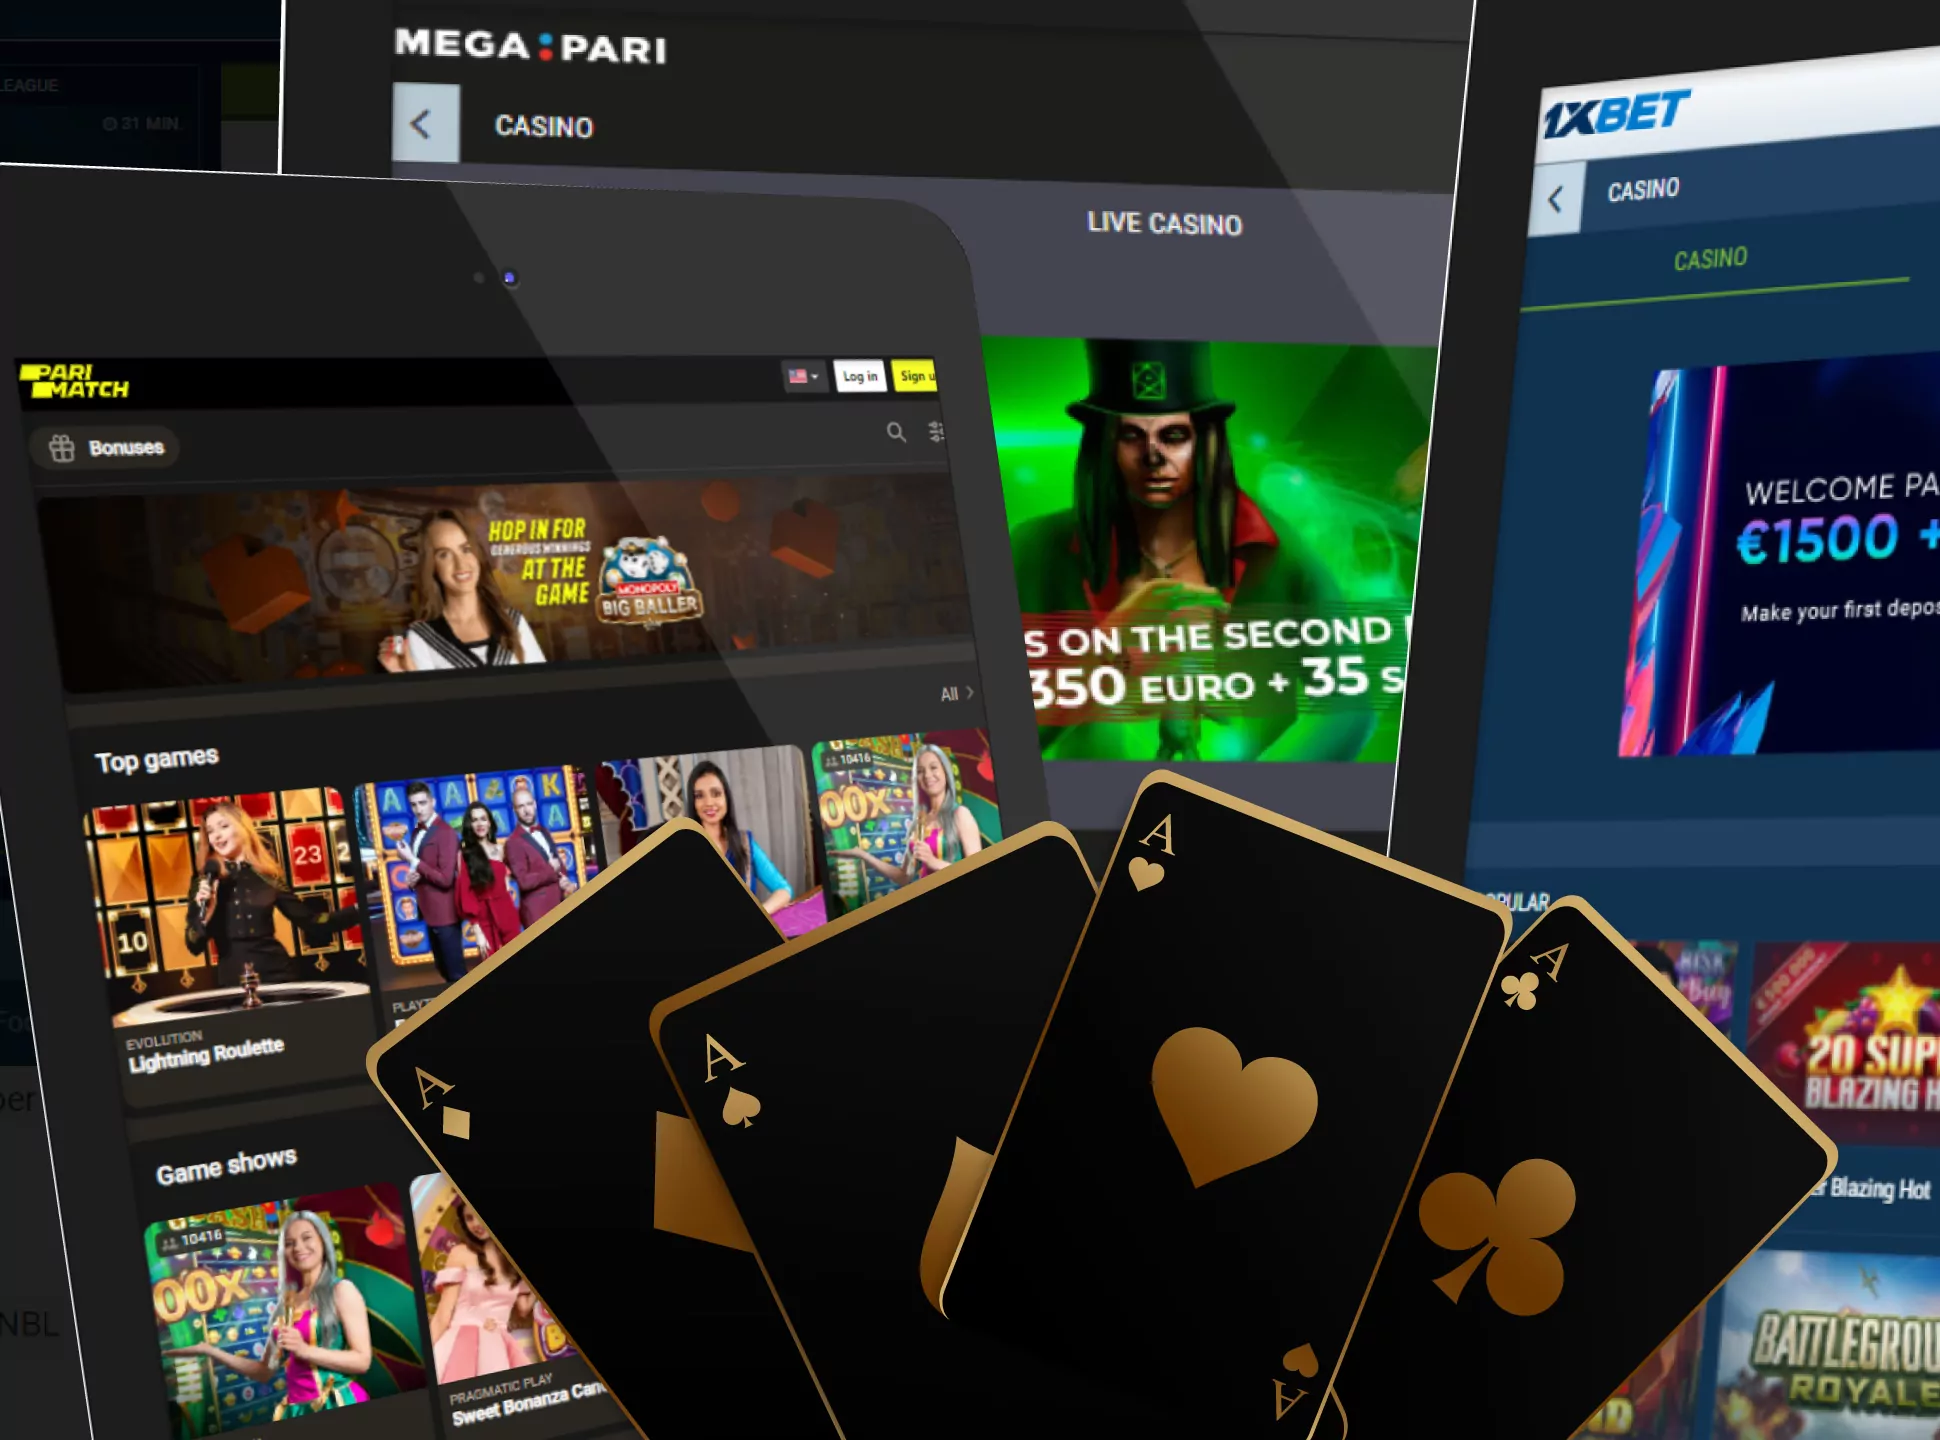 There is a wide range of games in the online casino.